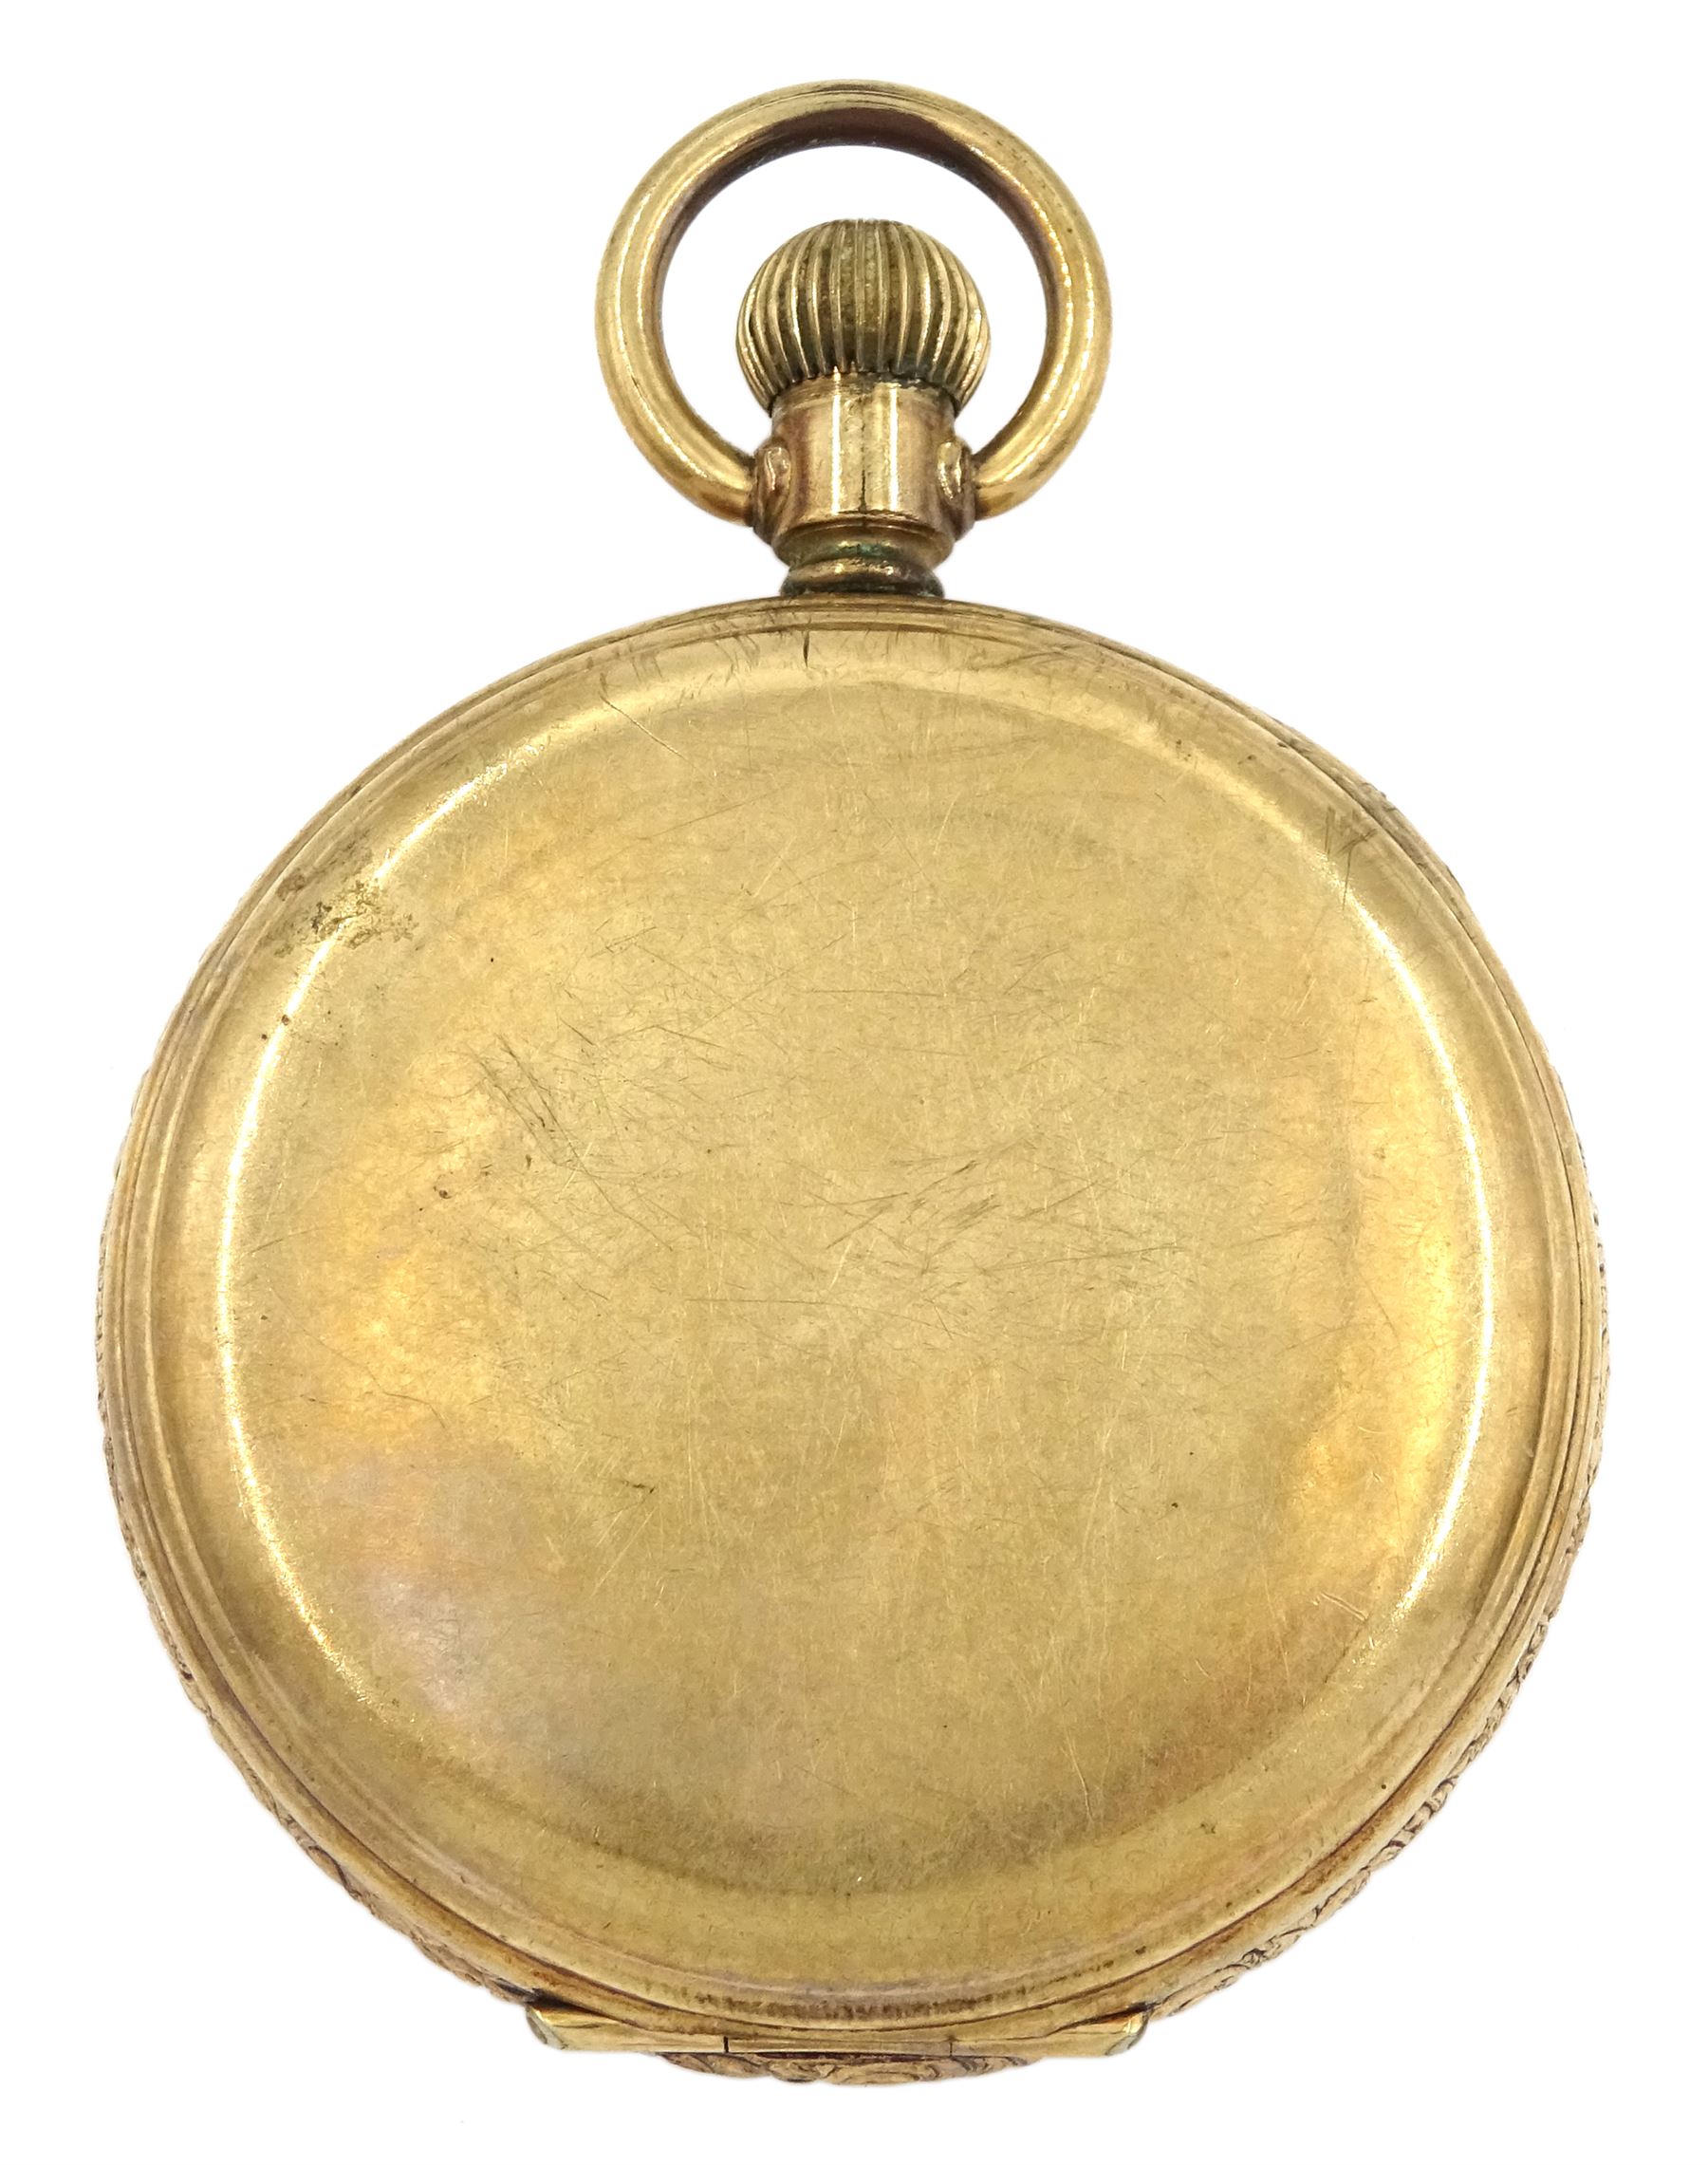 Early 20th century gold-plated open face keyless lever pocket watch by Thomas Russell & Son Liverpoo - Image 2 of 5